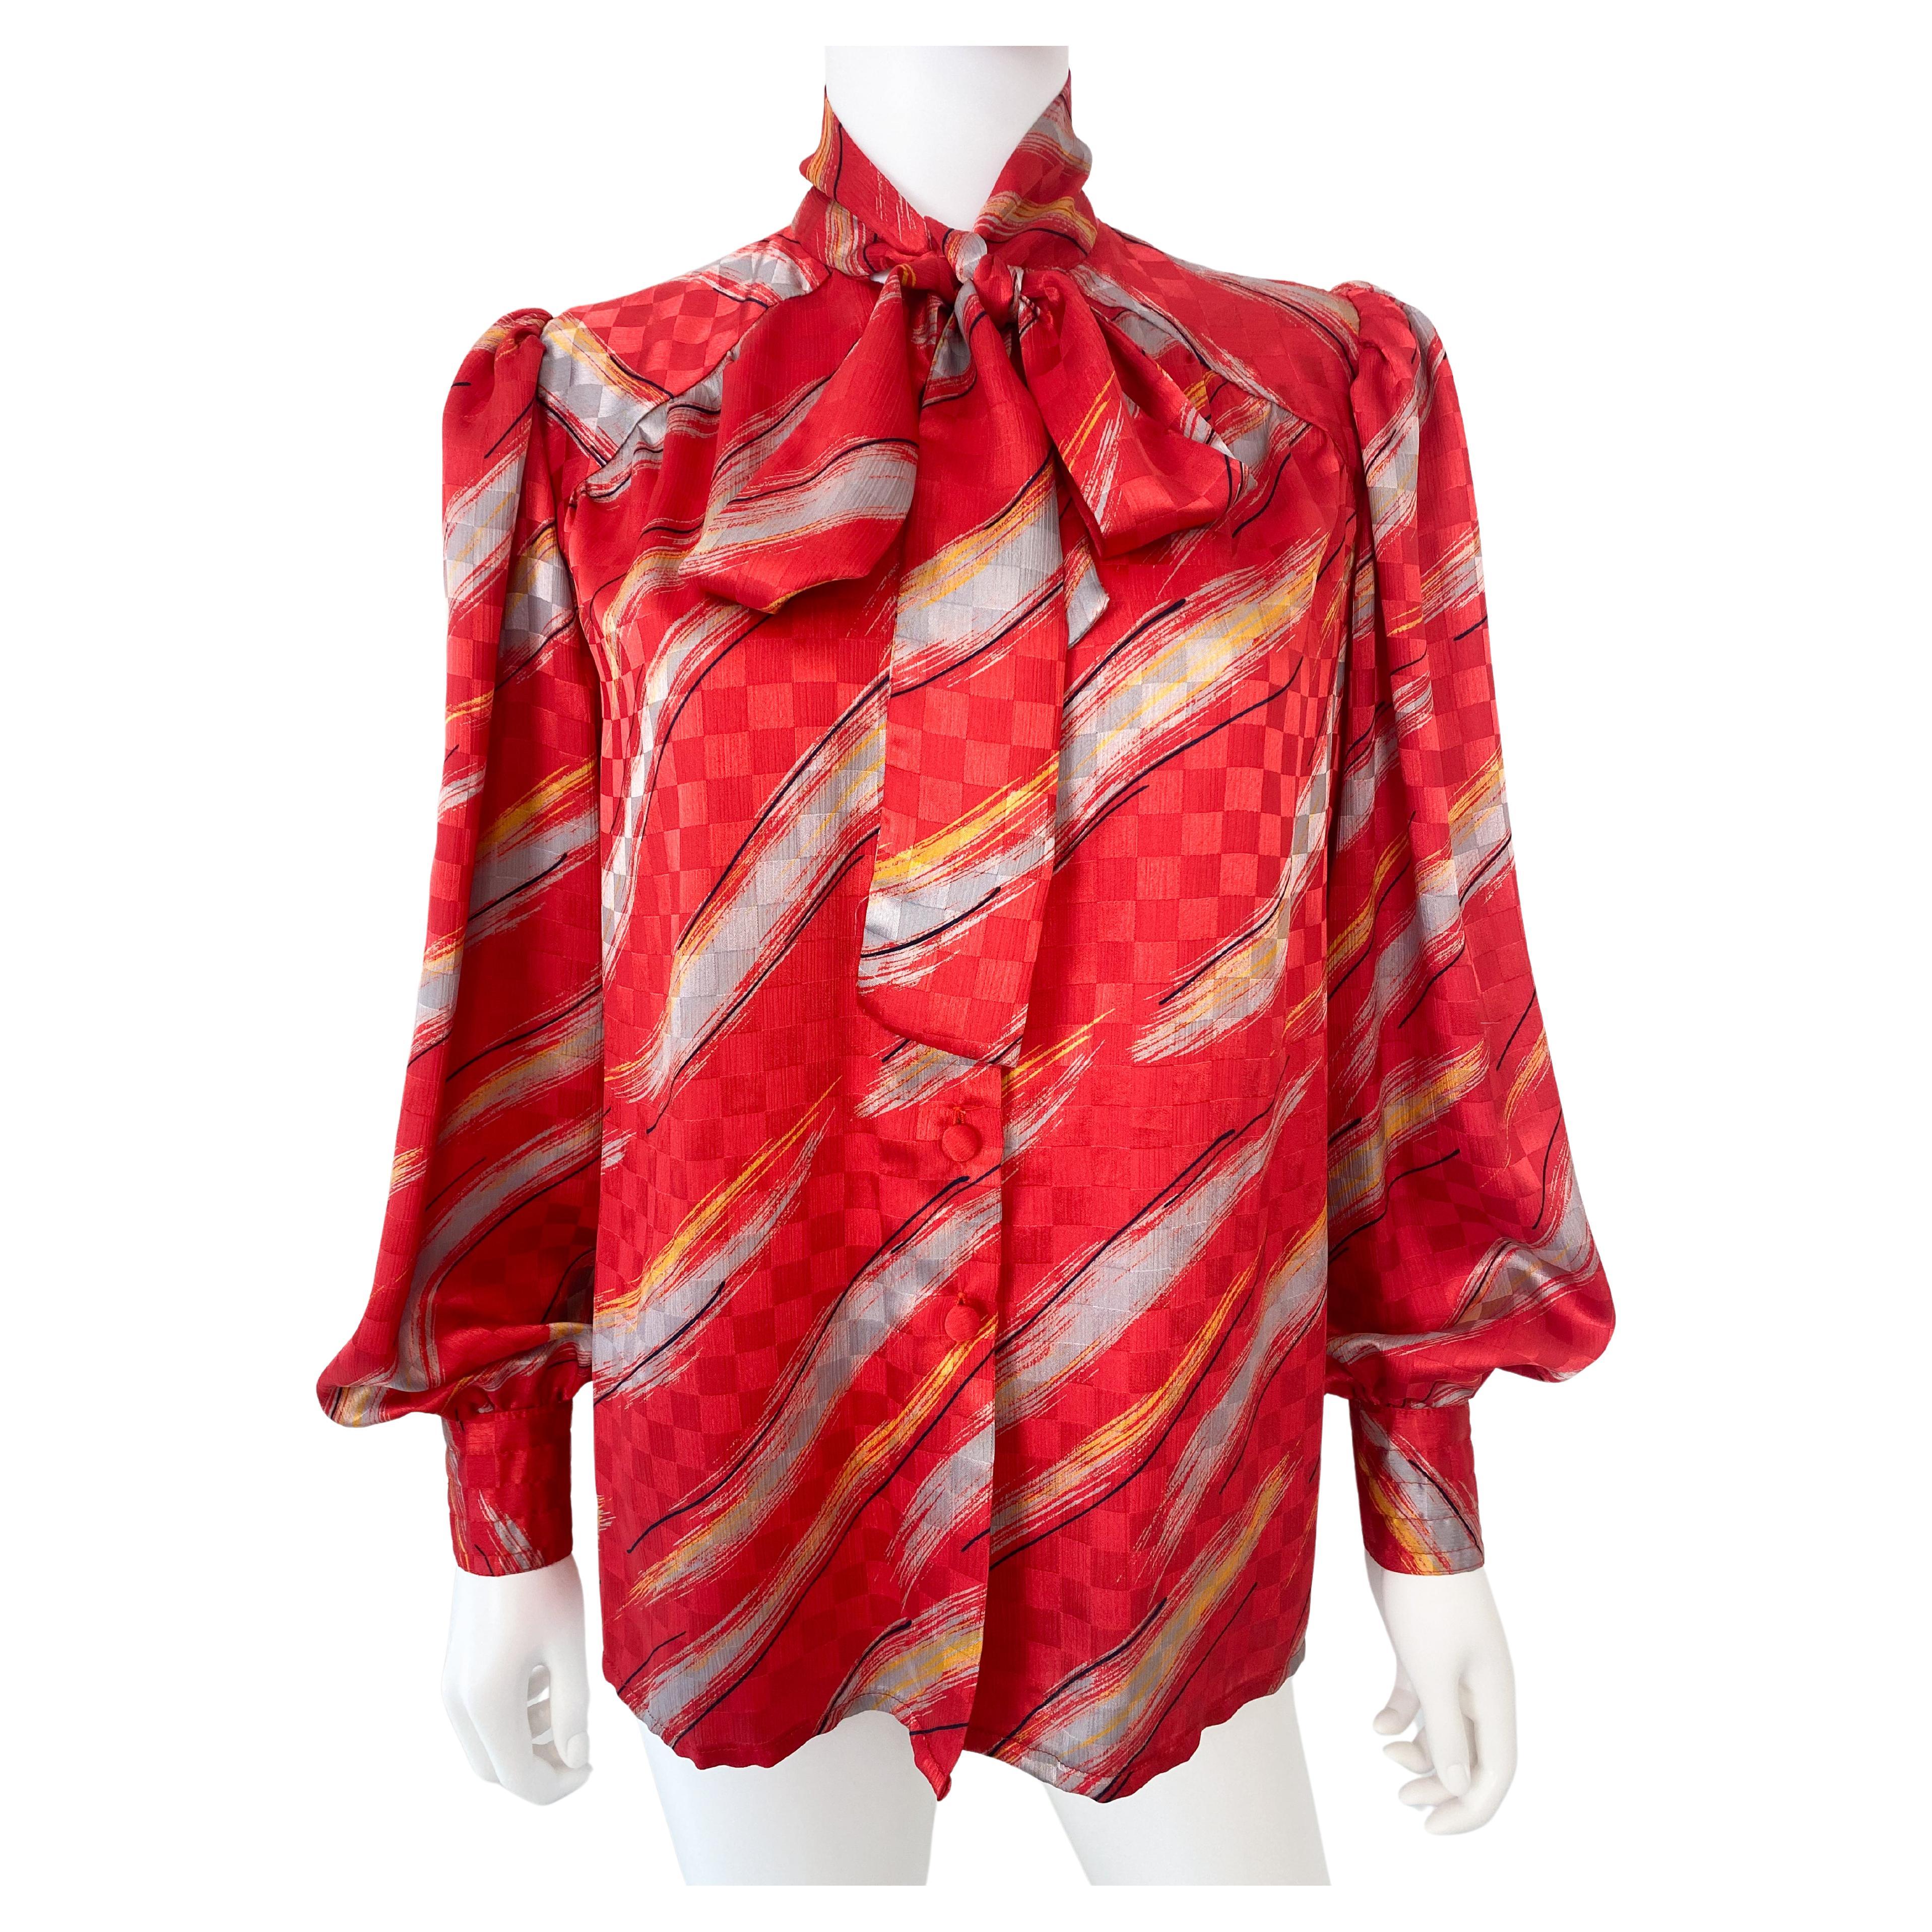 Vintage 1980s Silky Polyester Blouse Top Red and Gray Slashes Size 10/12 For Sale